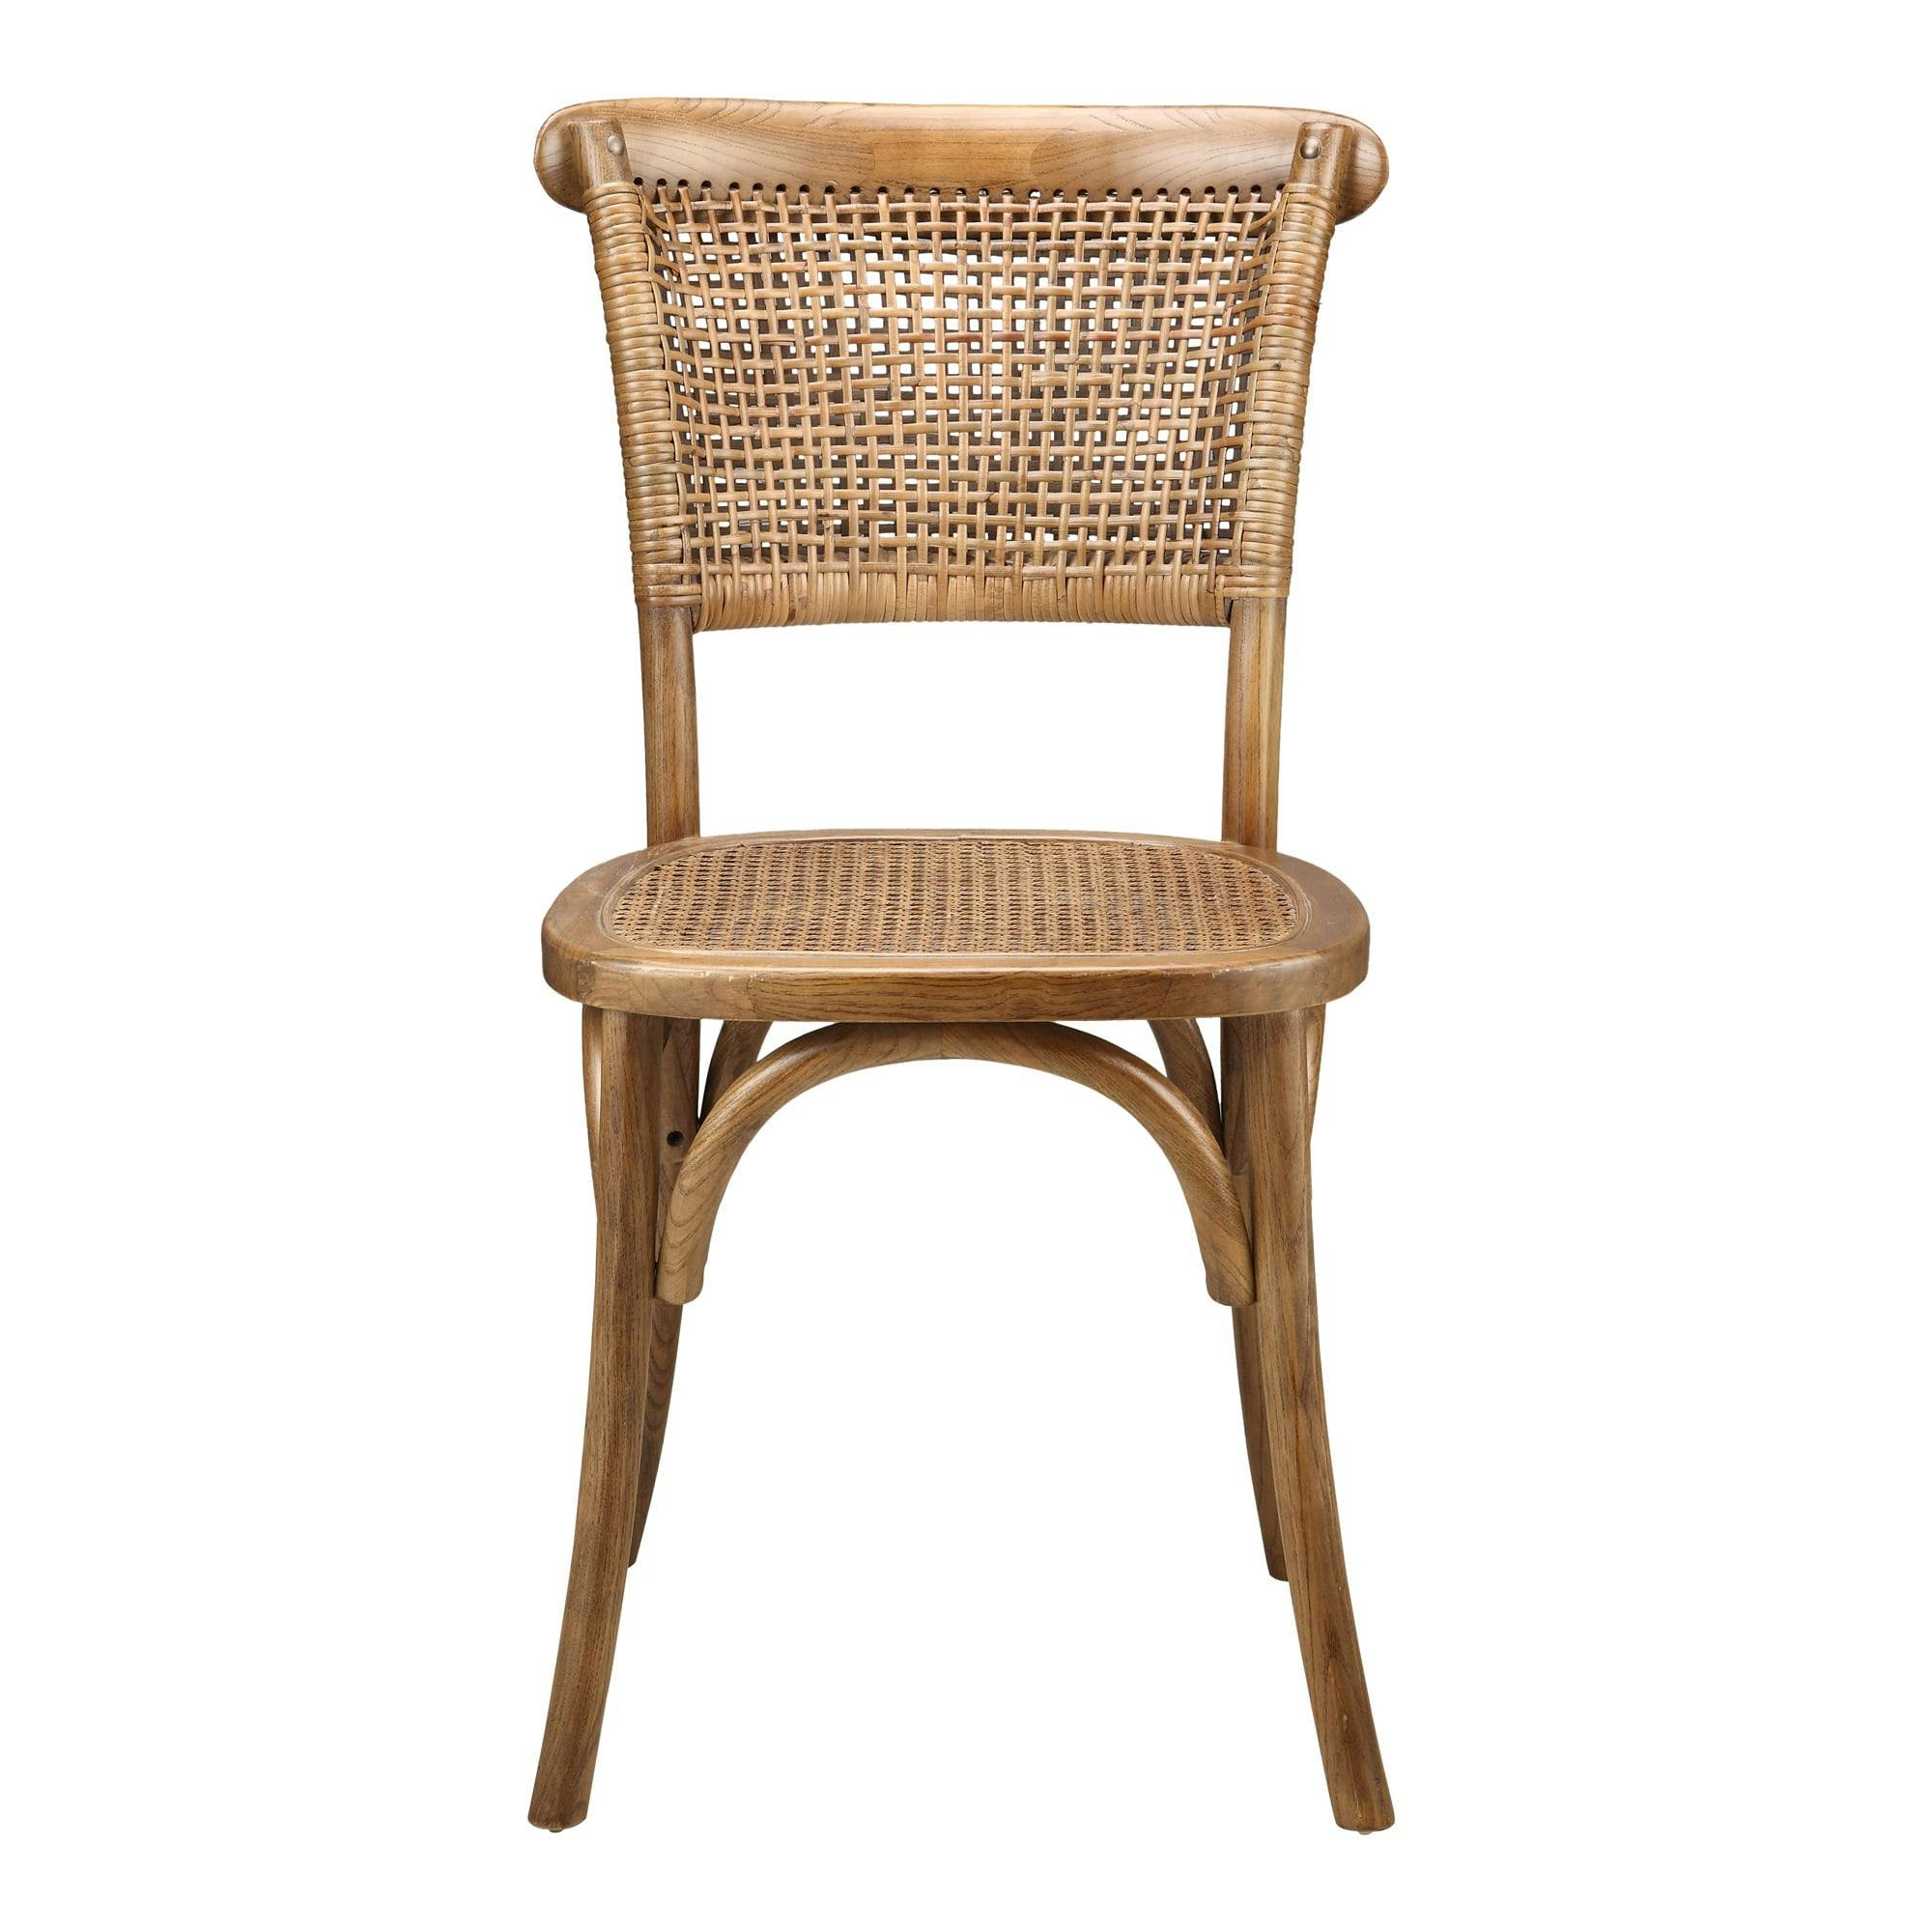 Rustic Transitional Brown Wood & Cane Side Chair, 18"W